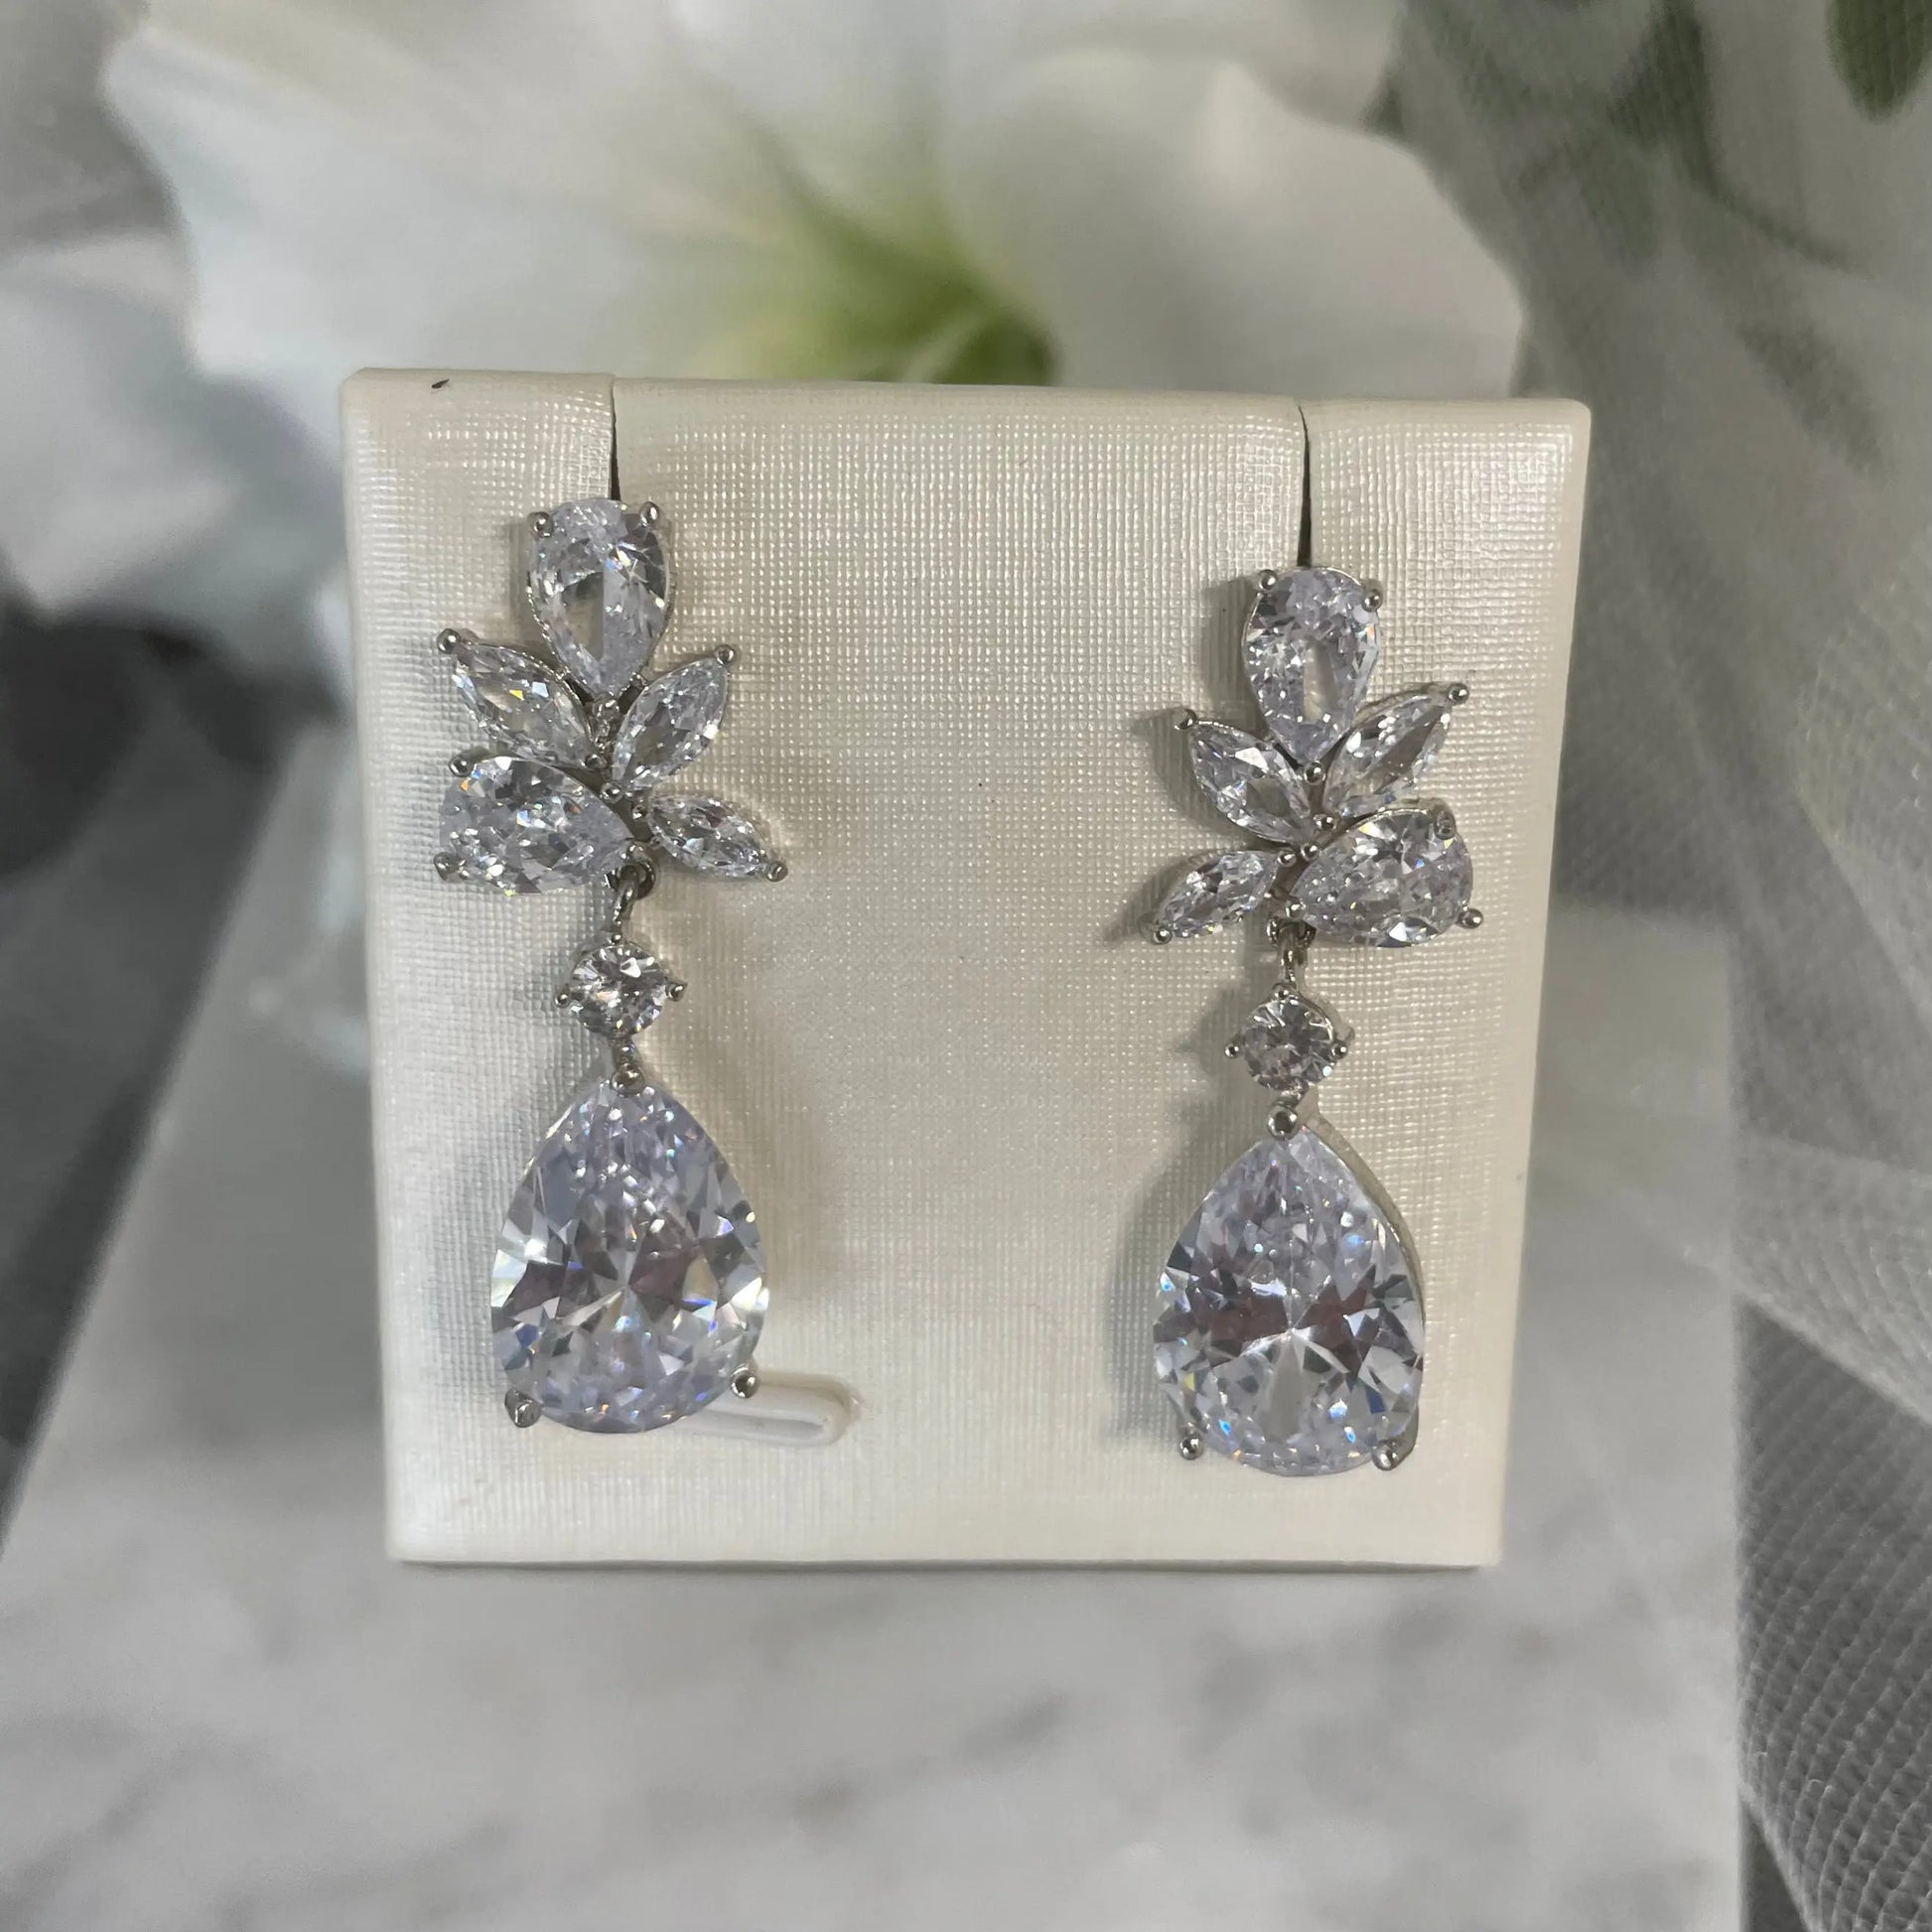 Tegan teardrop crystal earrings with a unique scattered crystal design in rhodium-plated metal, ideal for brides and bridesmaids seeking elegant and distinctive bridal jewelry.